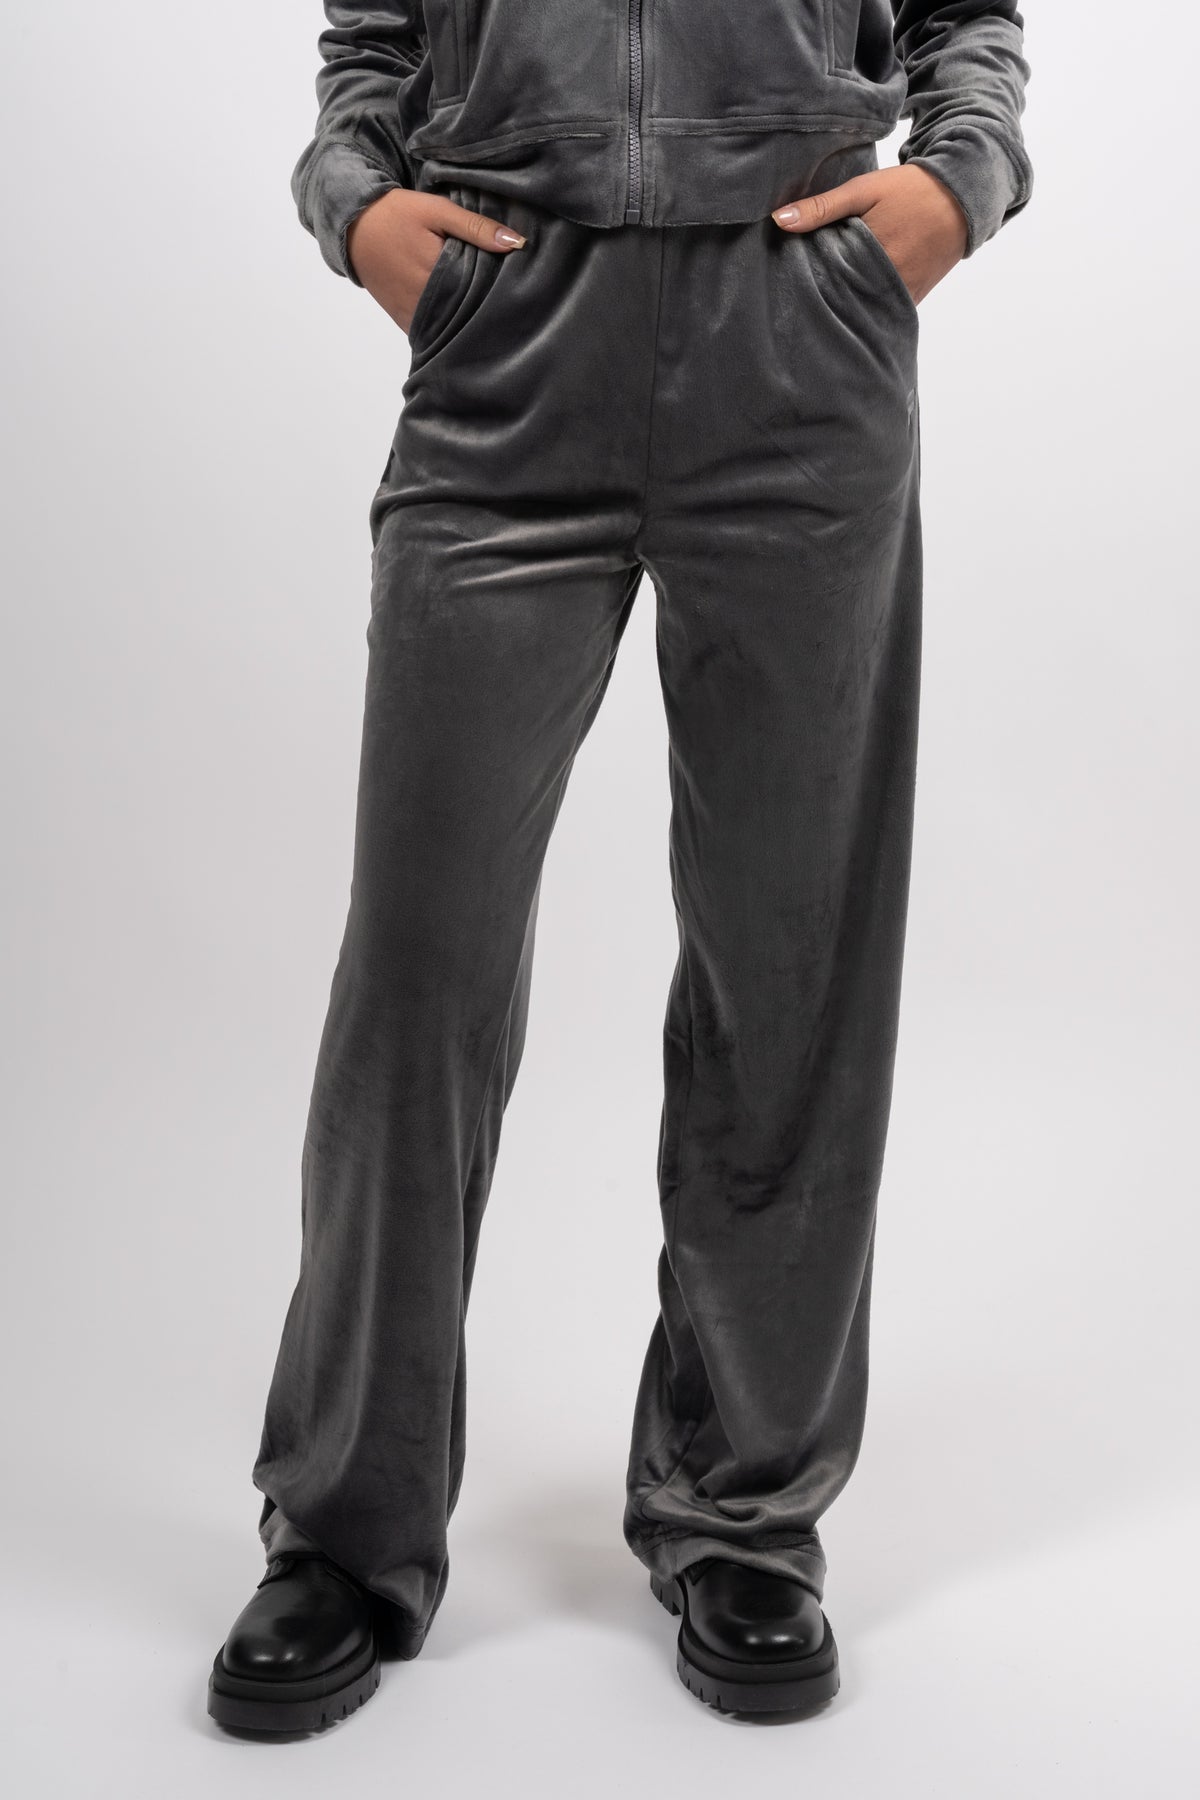 Clamecy Overlength Pants - Iron Gate